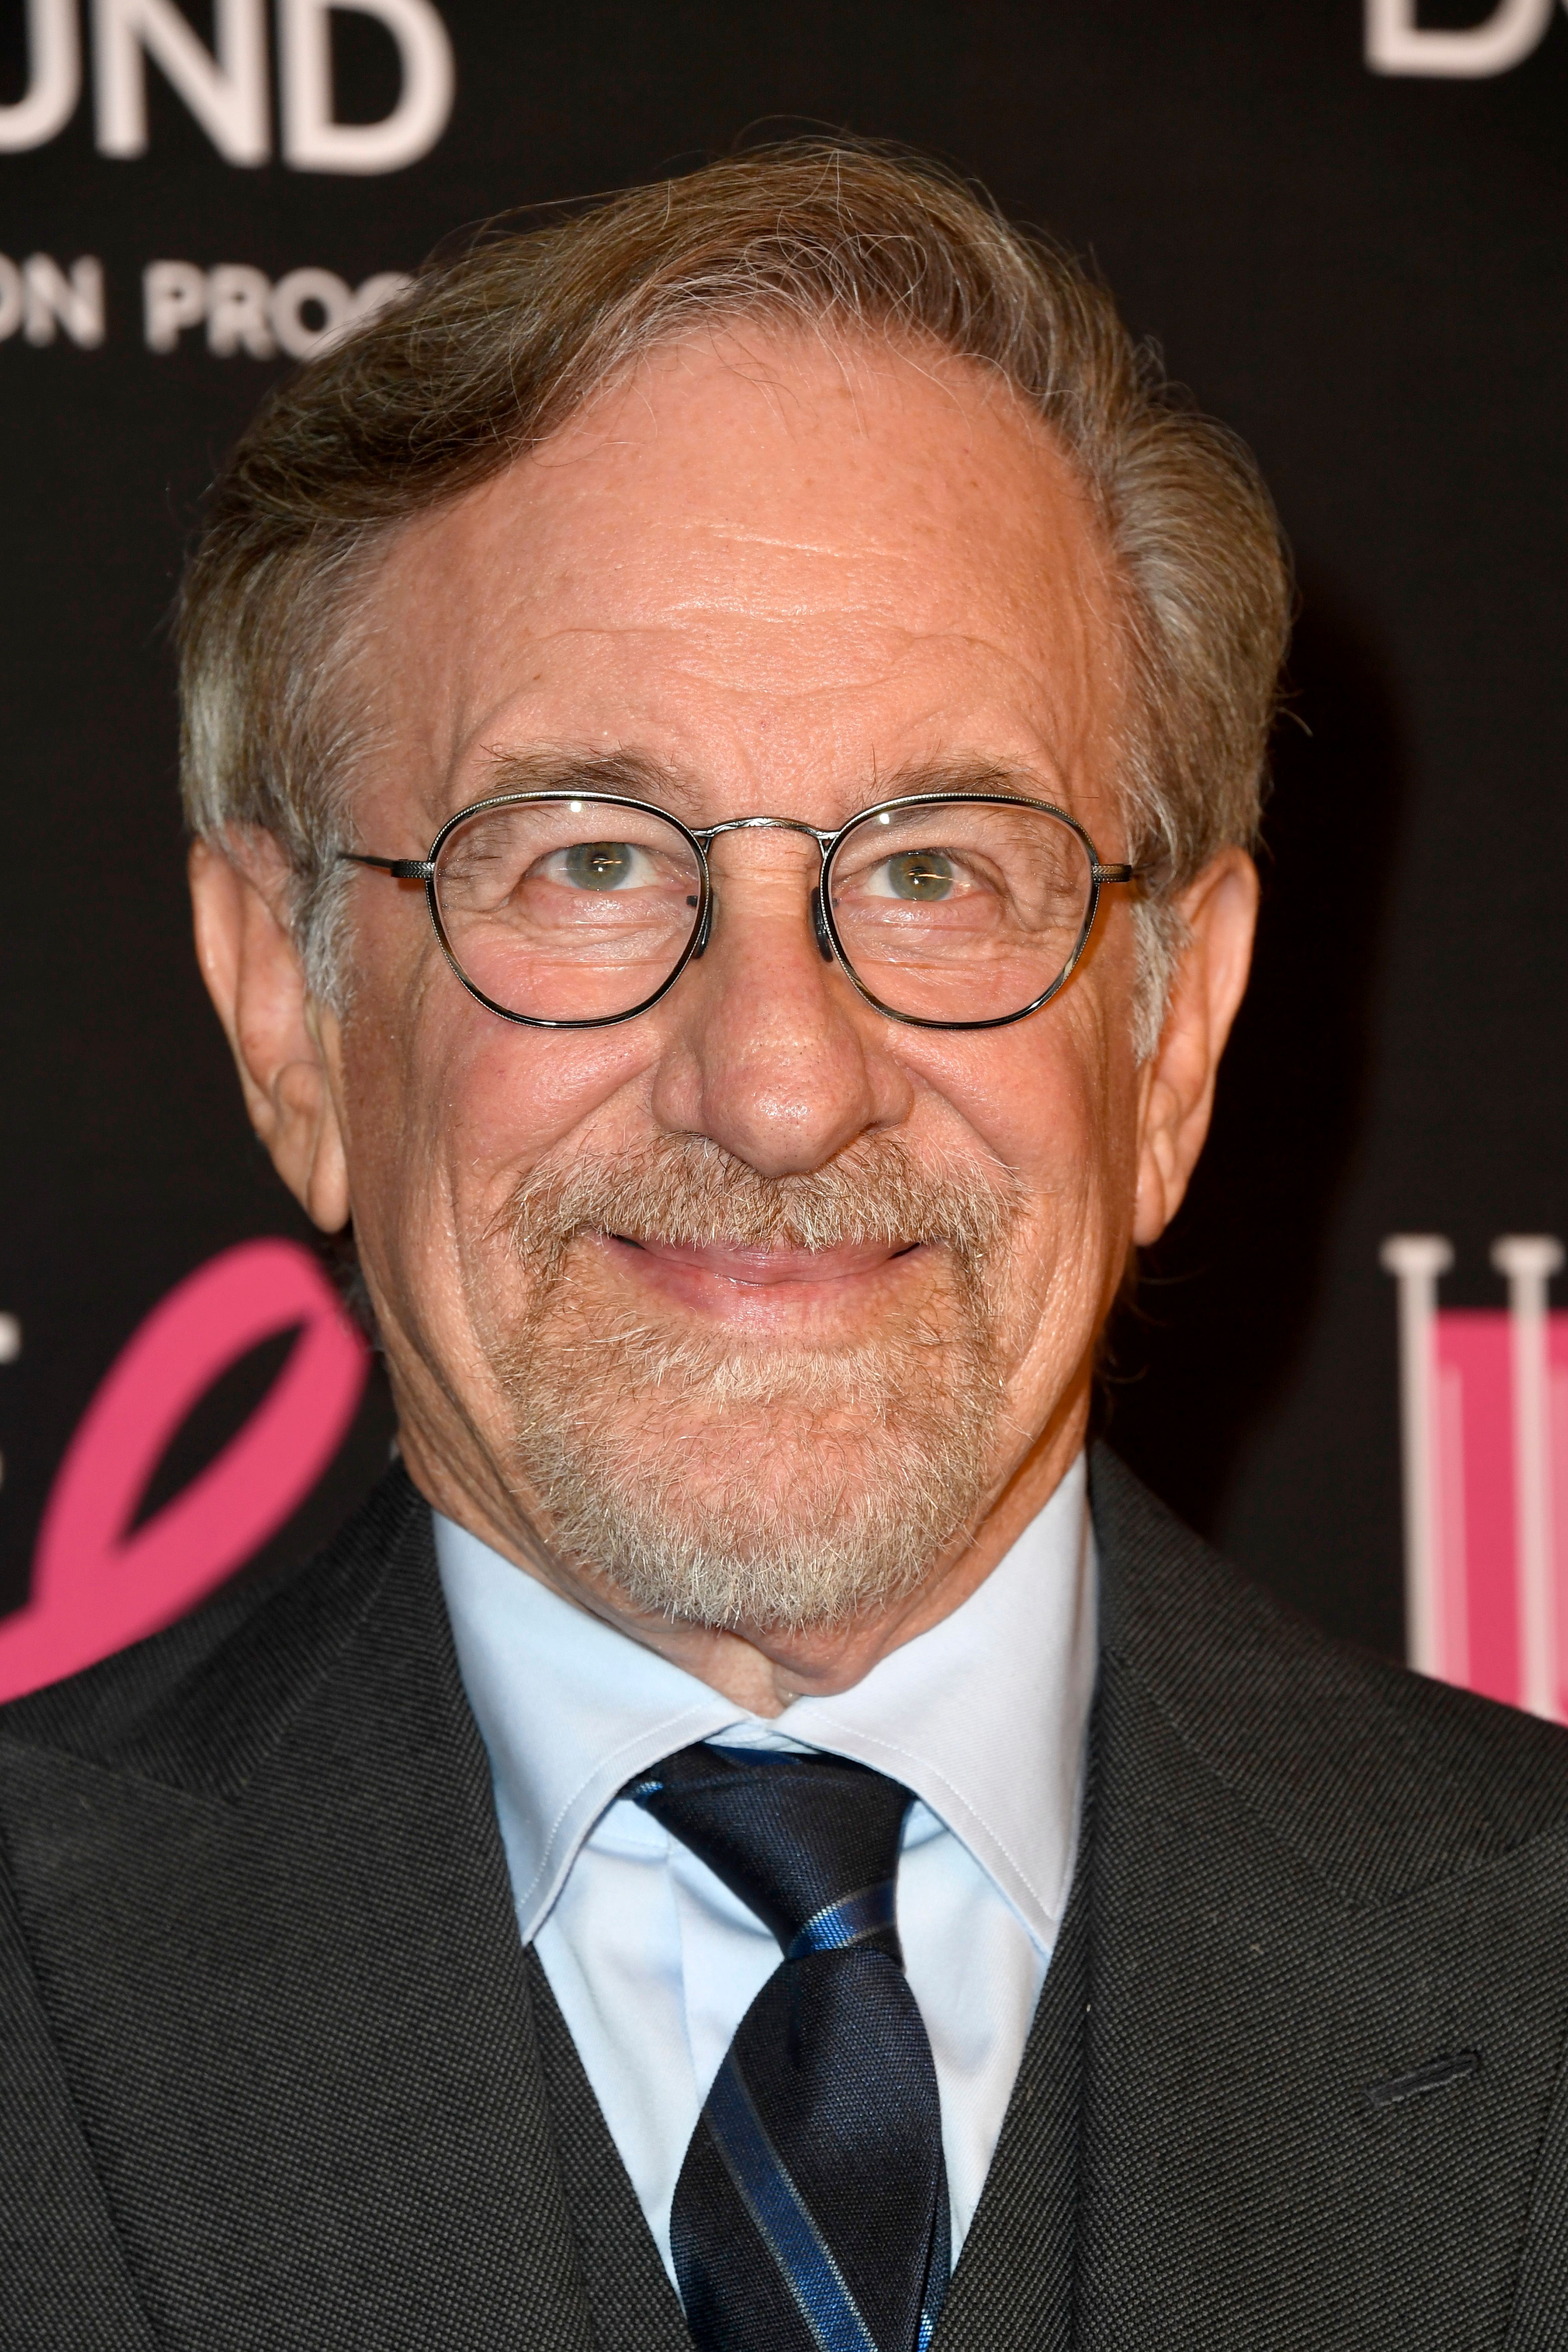 Steven Spielberg during The Women's Cancer Research Fund's An Unforgettable Evening Benefit Gala at the Beverly Wilshire Four Seasons Hotel on February 28, 2019 in Beverly Hills, California. | Source: Getty Images